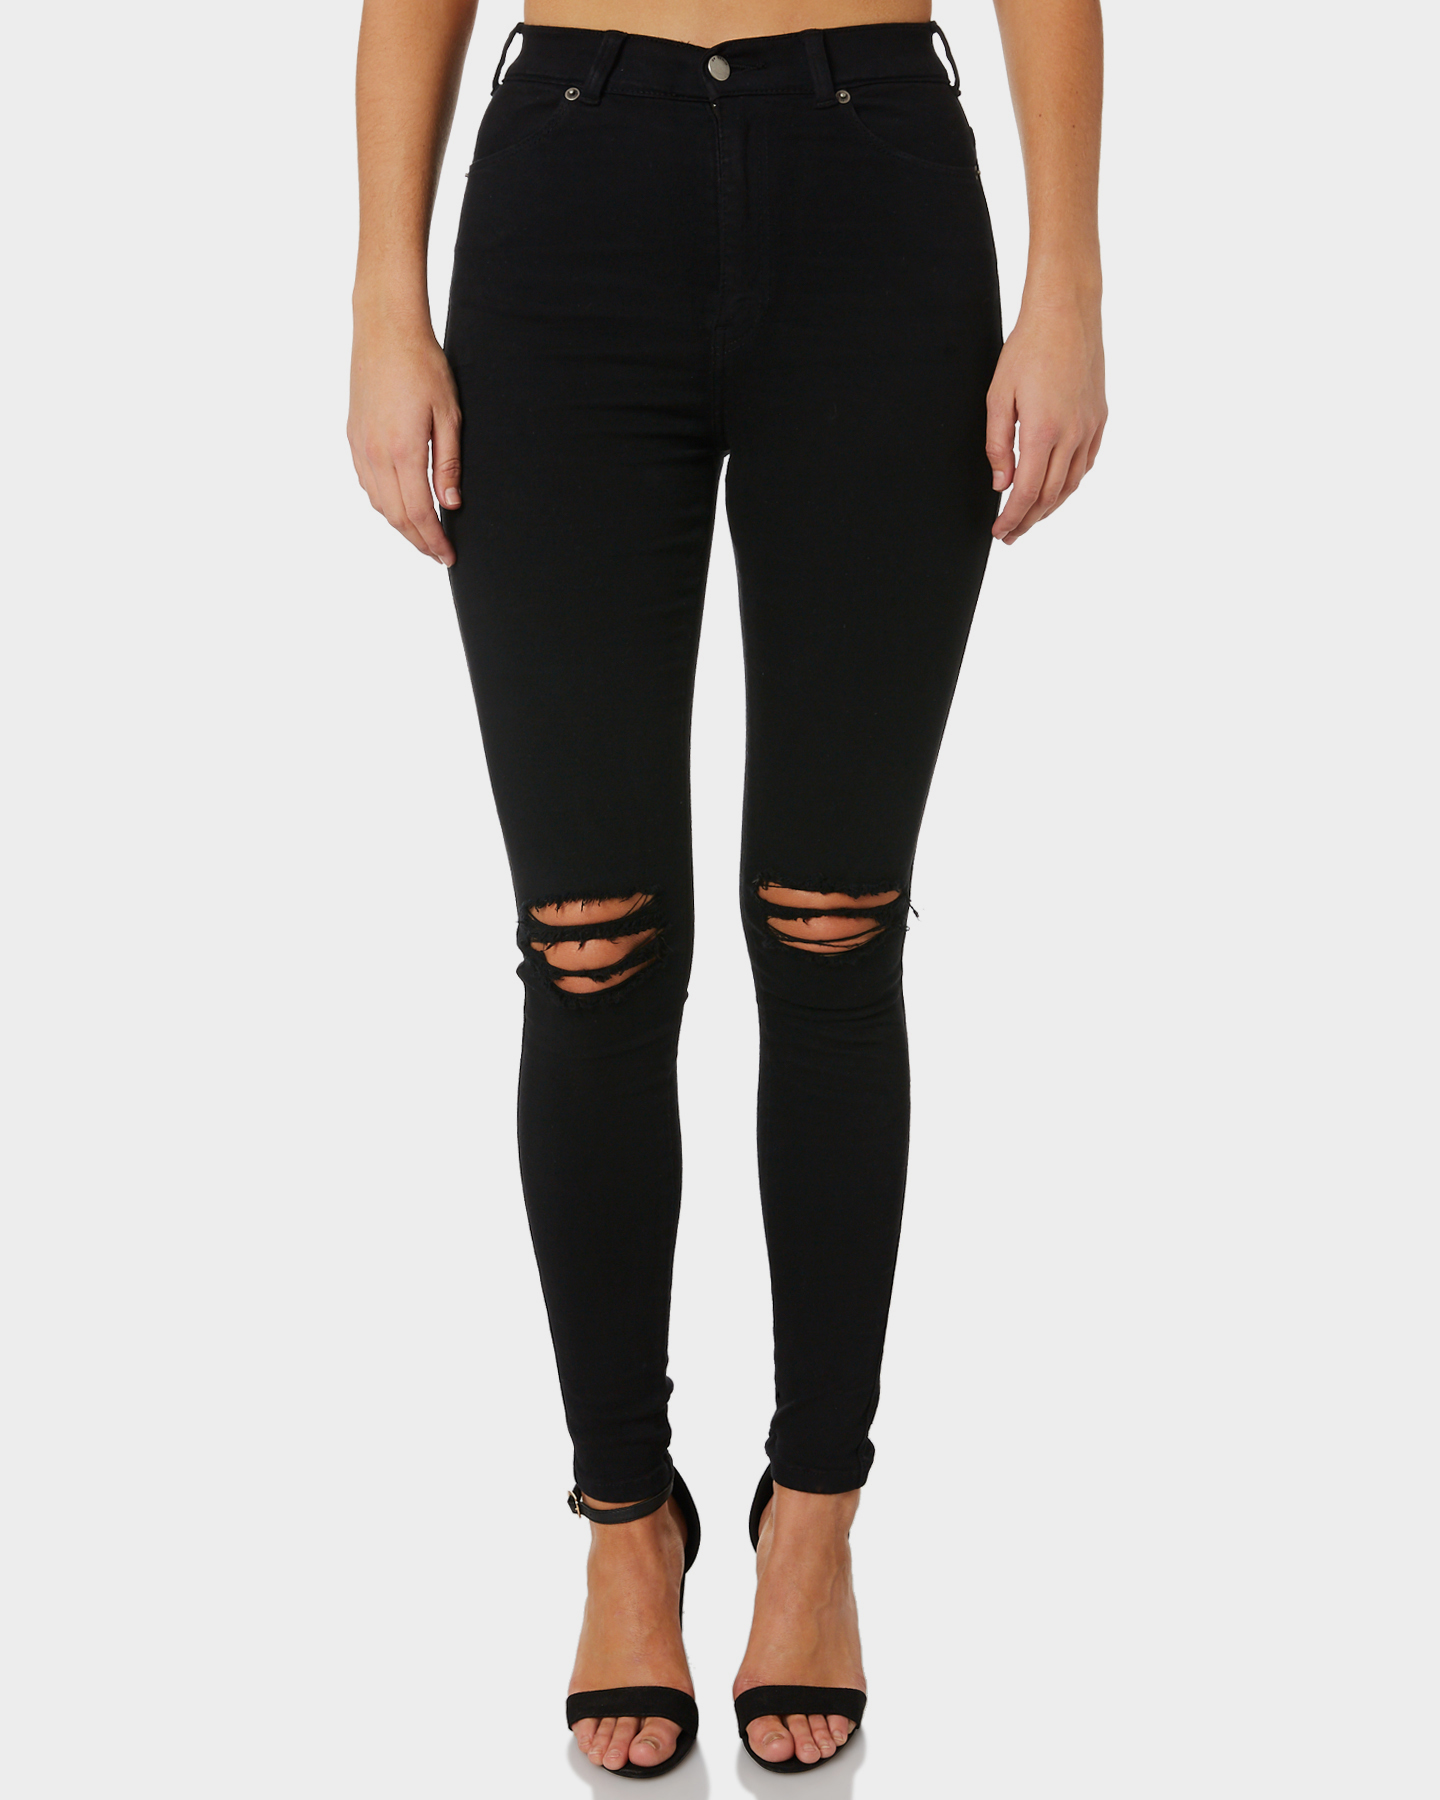 black high waisted ripped jeans with belt loops